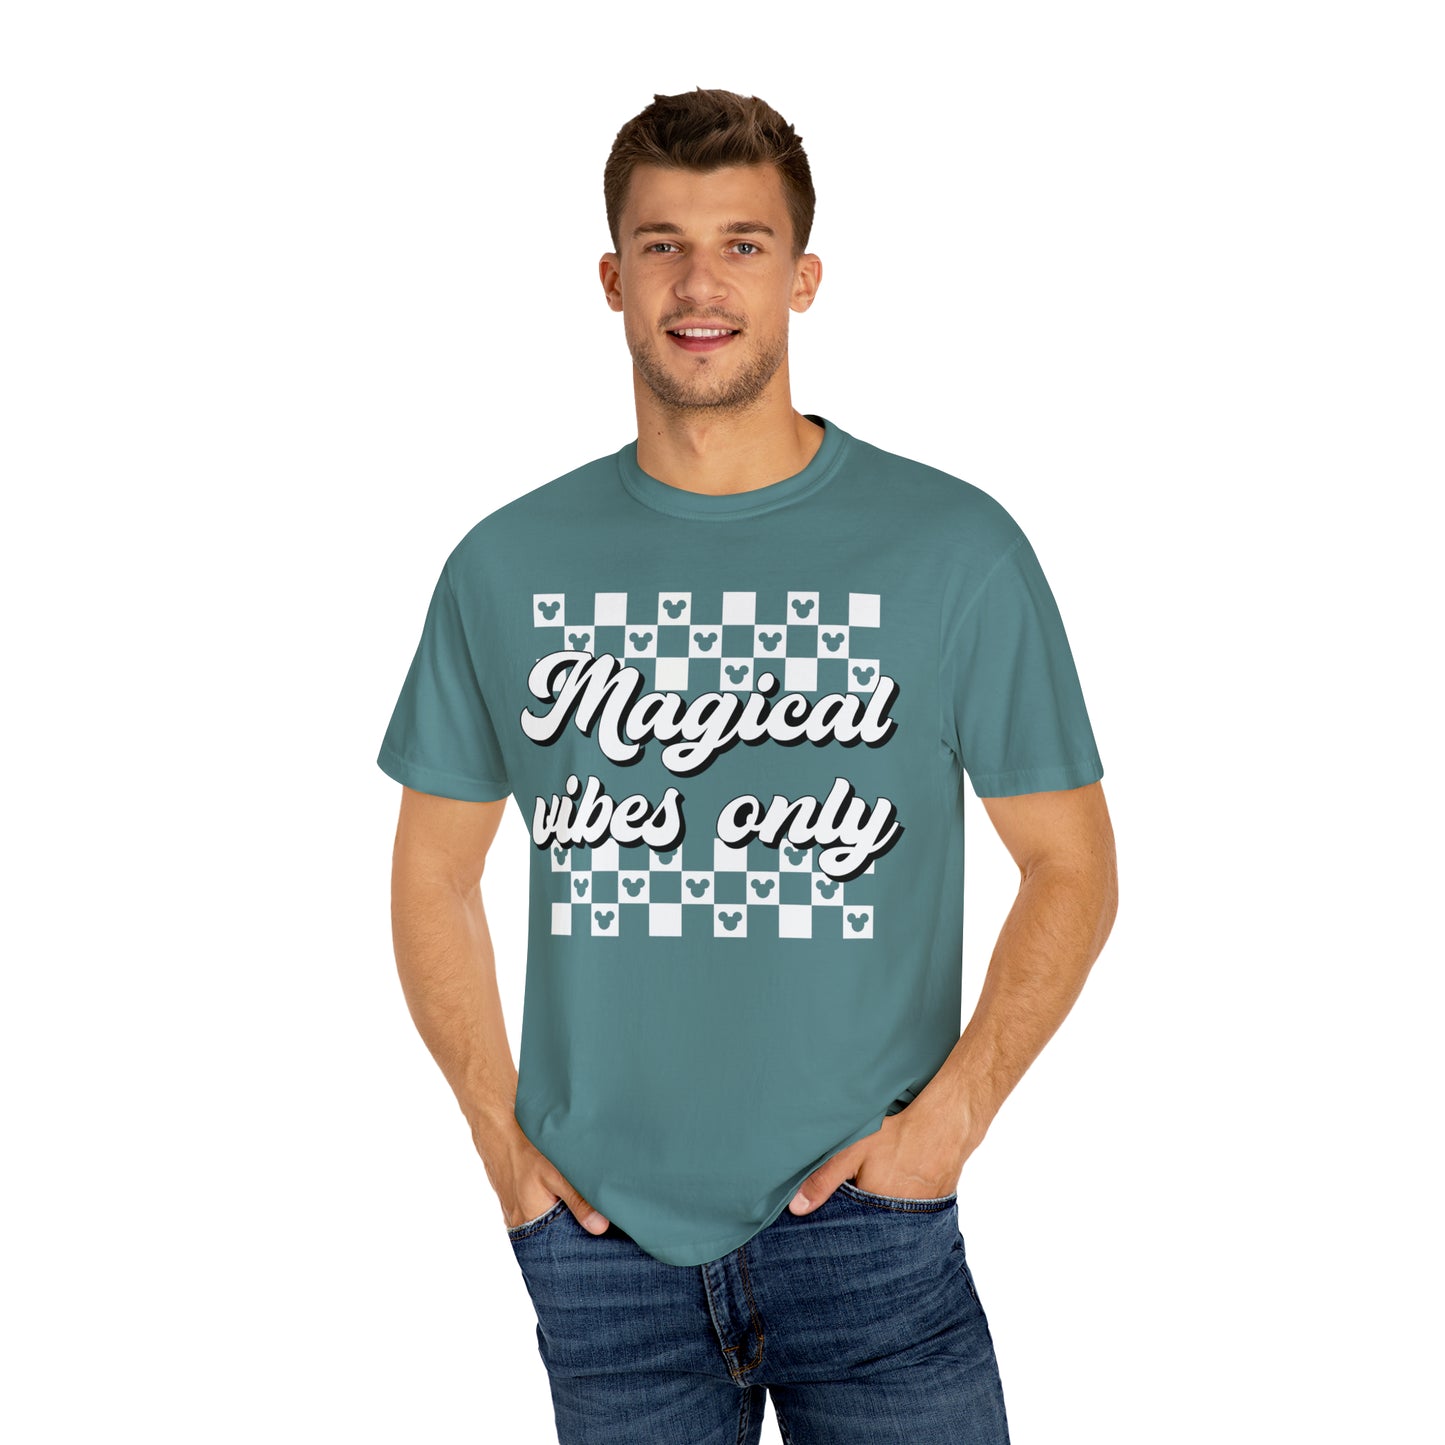 Adult Magical Vibes Only Tee - White Font - Comfort Colors